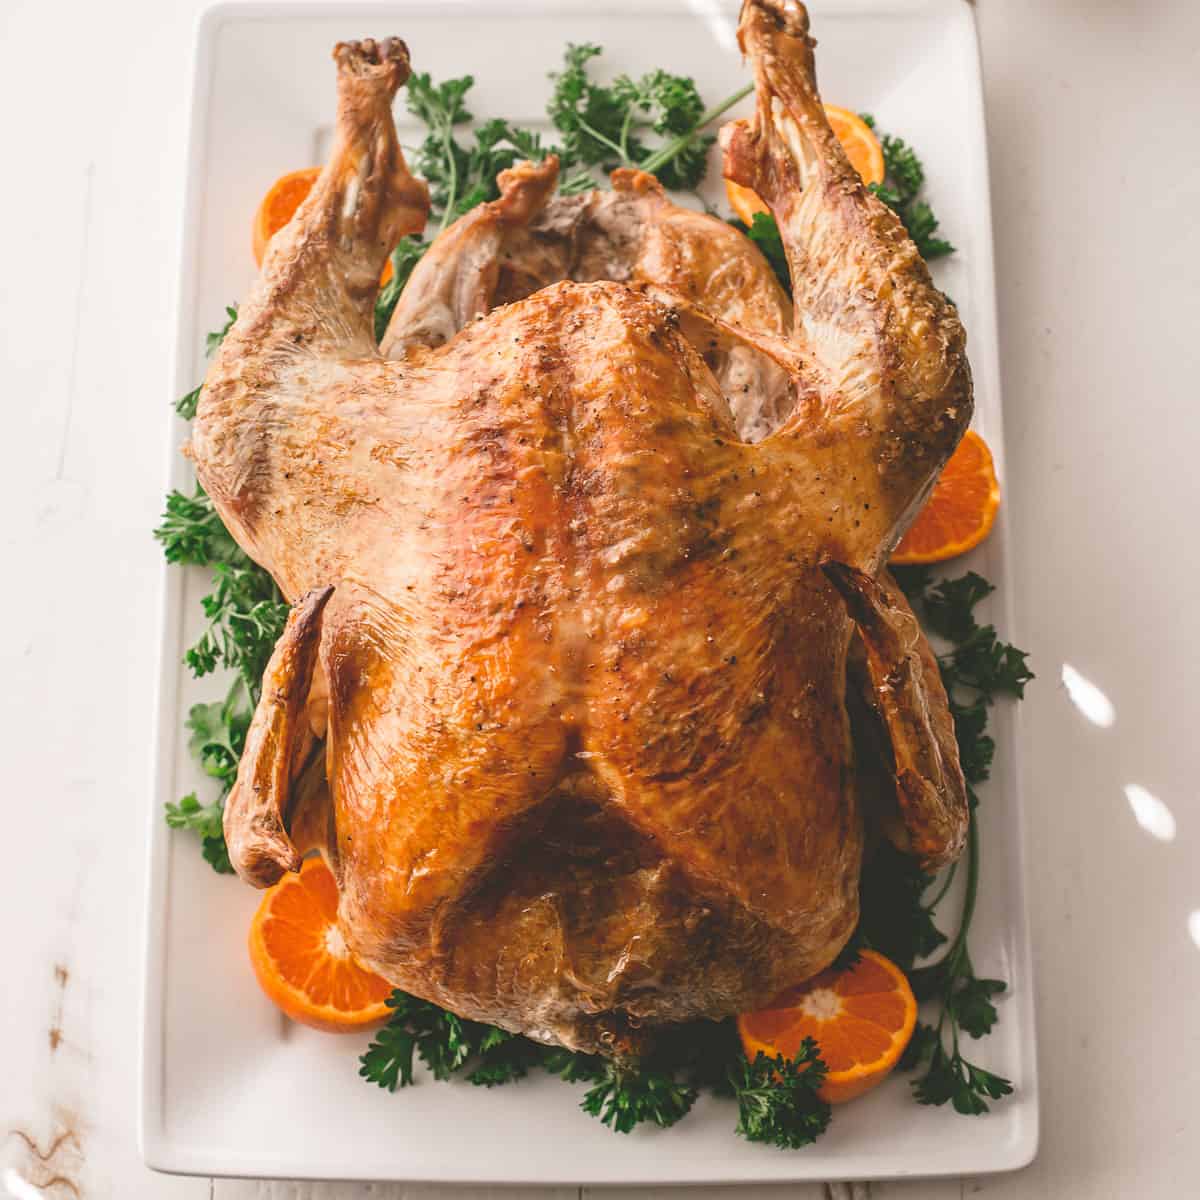 https://inquiringchef.com/wp-content/uploads/2020/10/The-Simplest-Way-to-Roast-a-Turkey_square.jpg